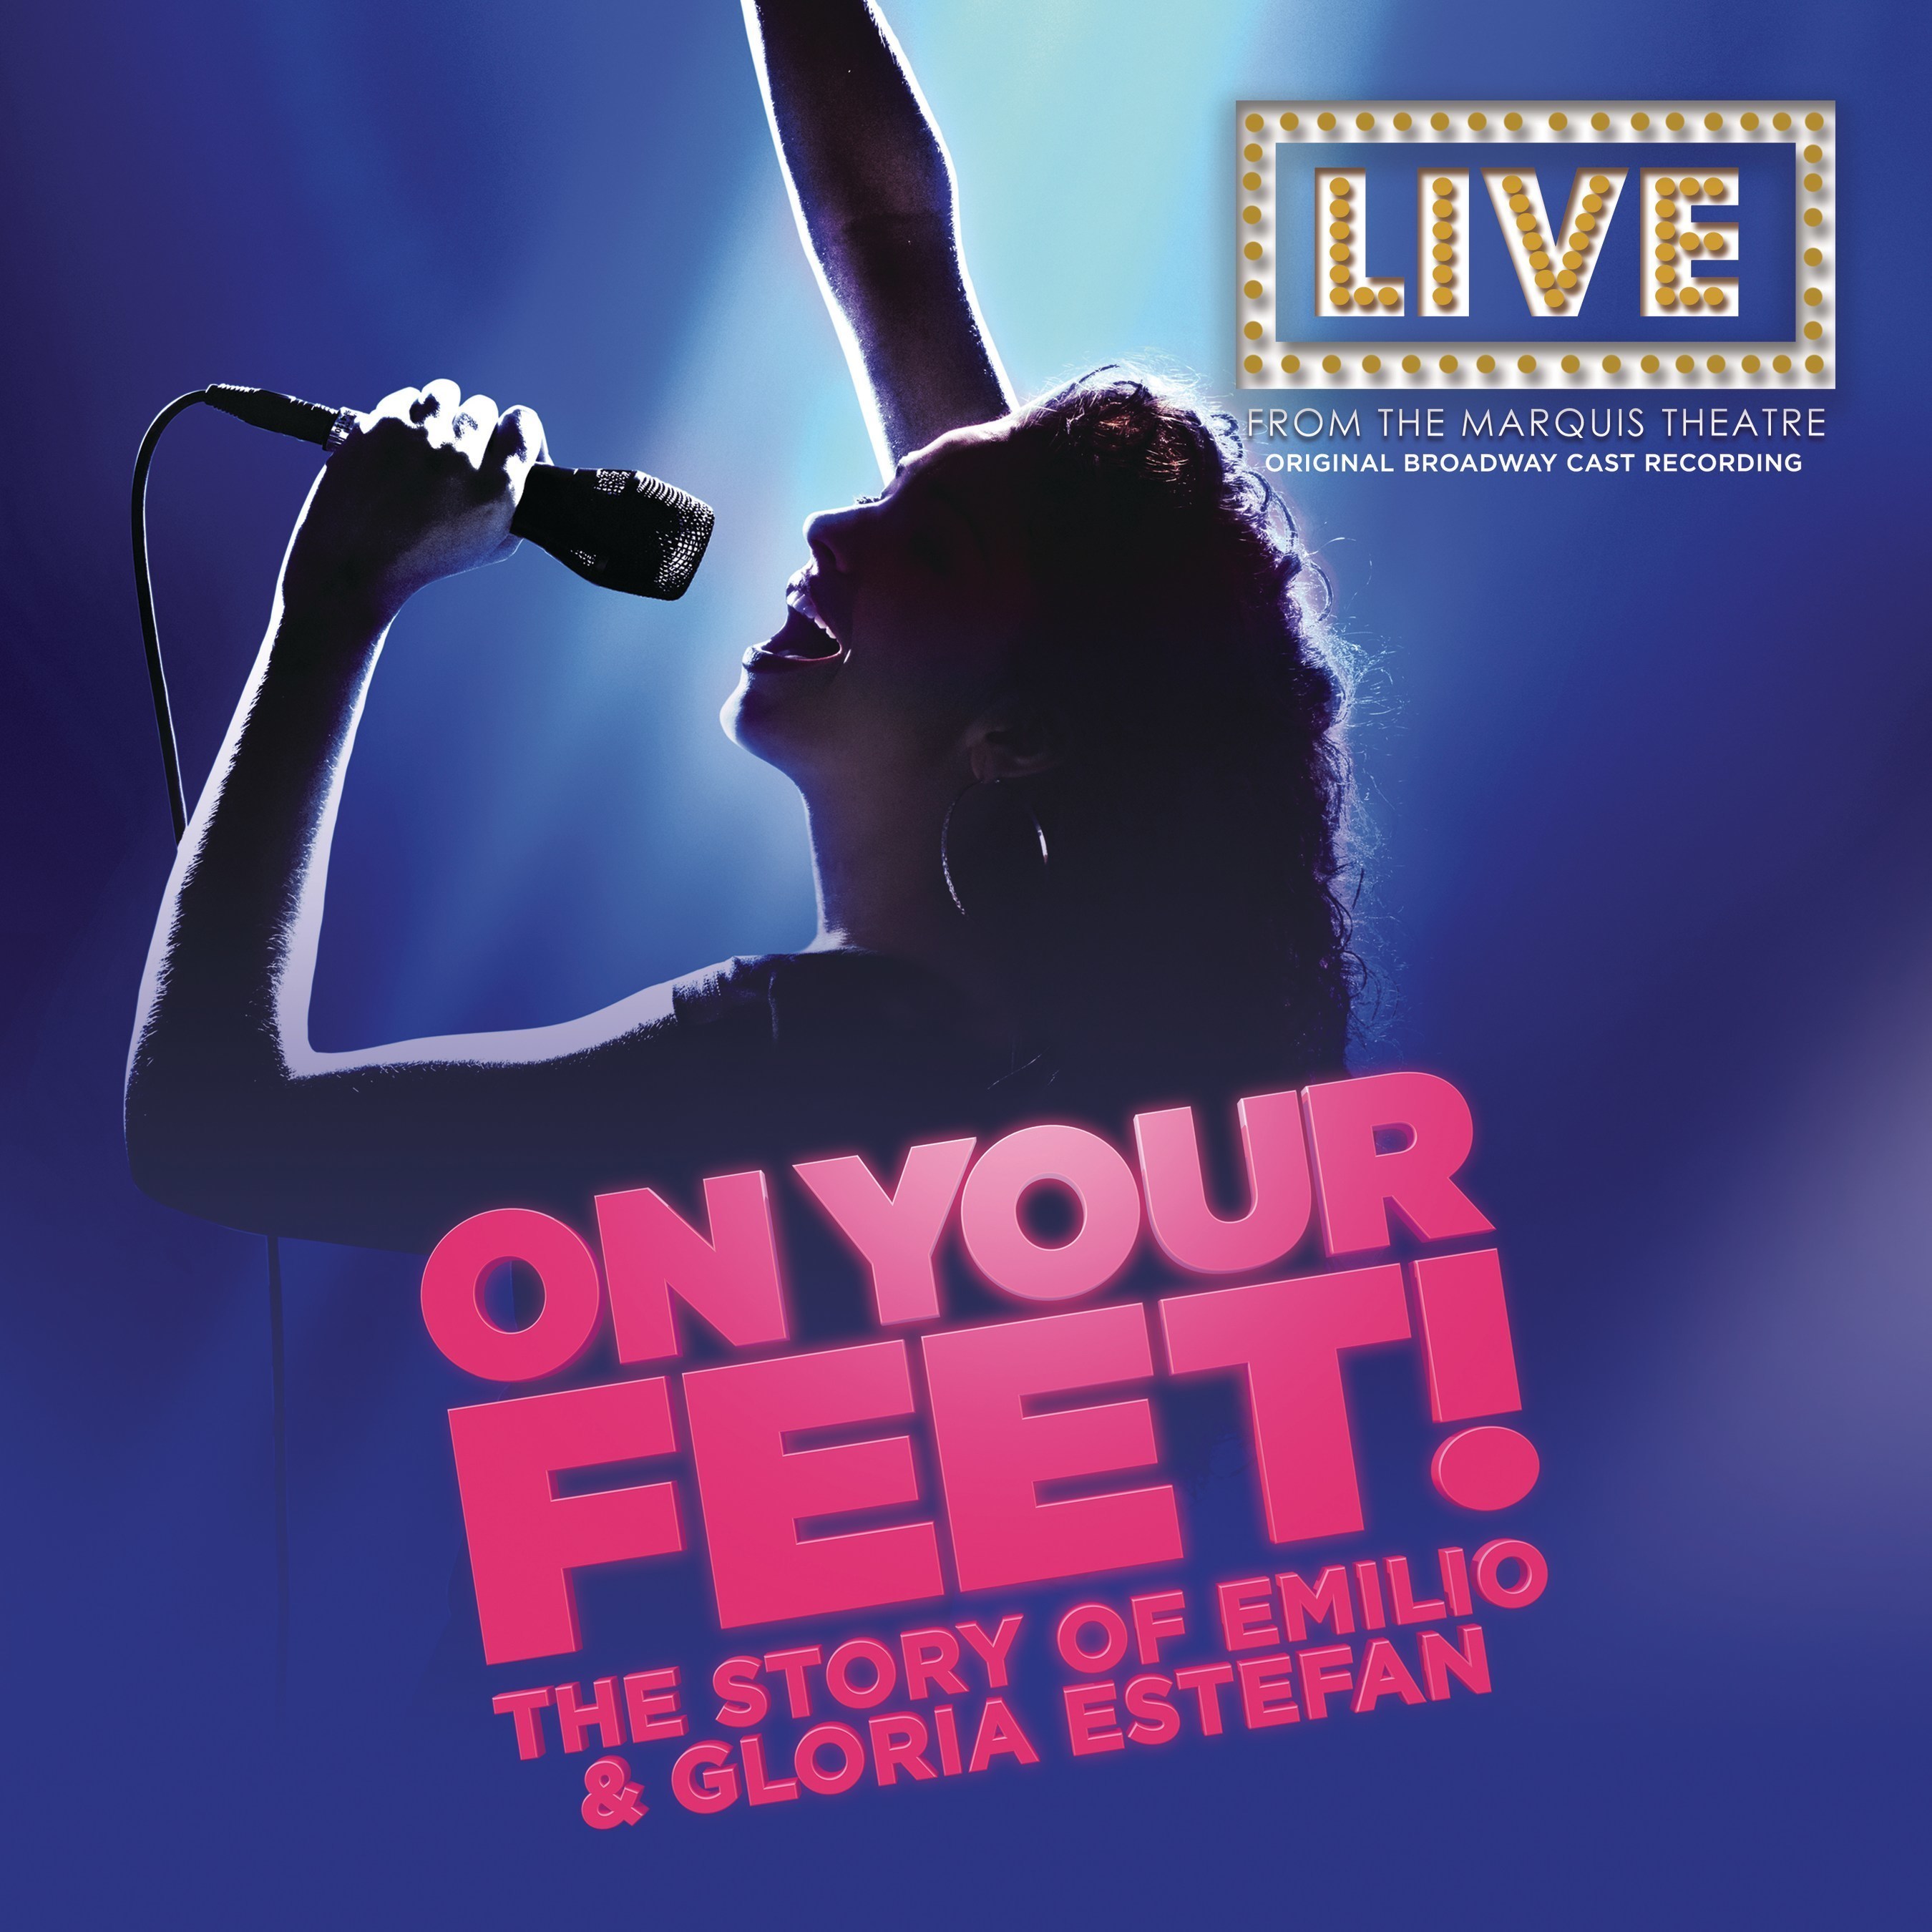 Masterworks Broadway Releases The Original Broadway Cast Recording Of ON YOUR FEET